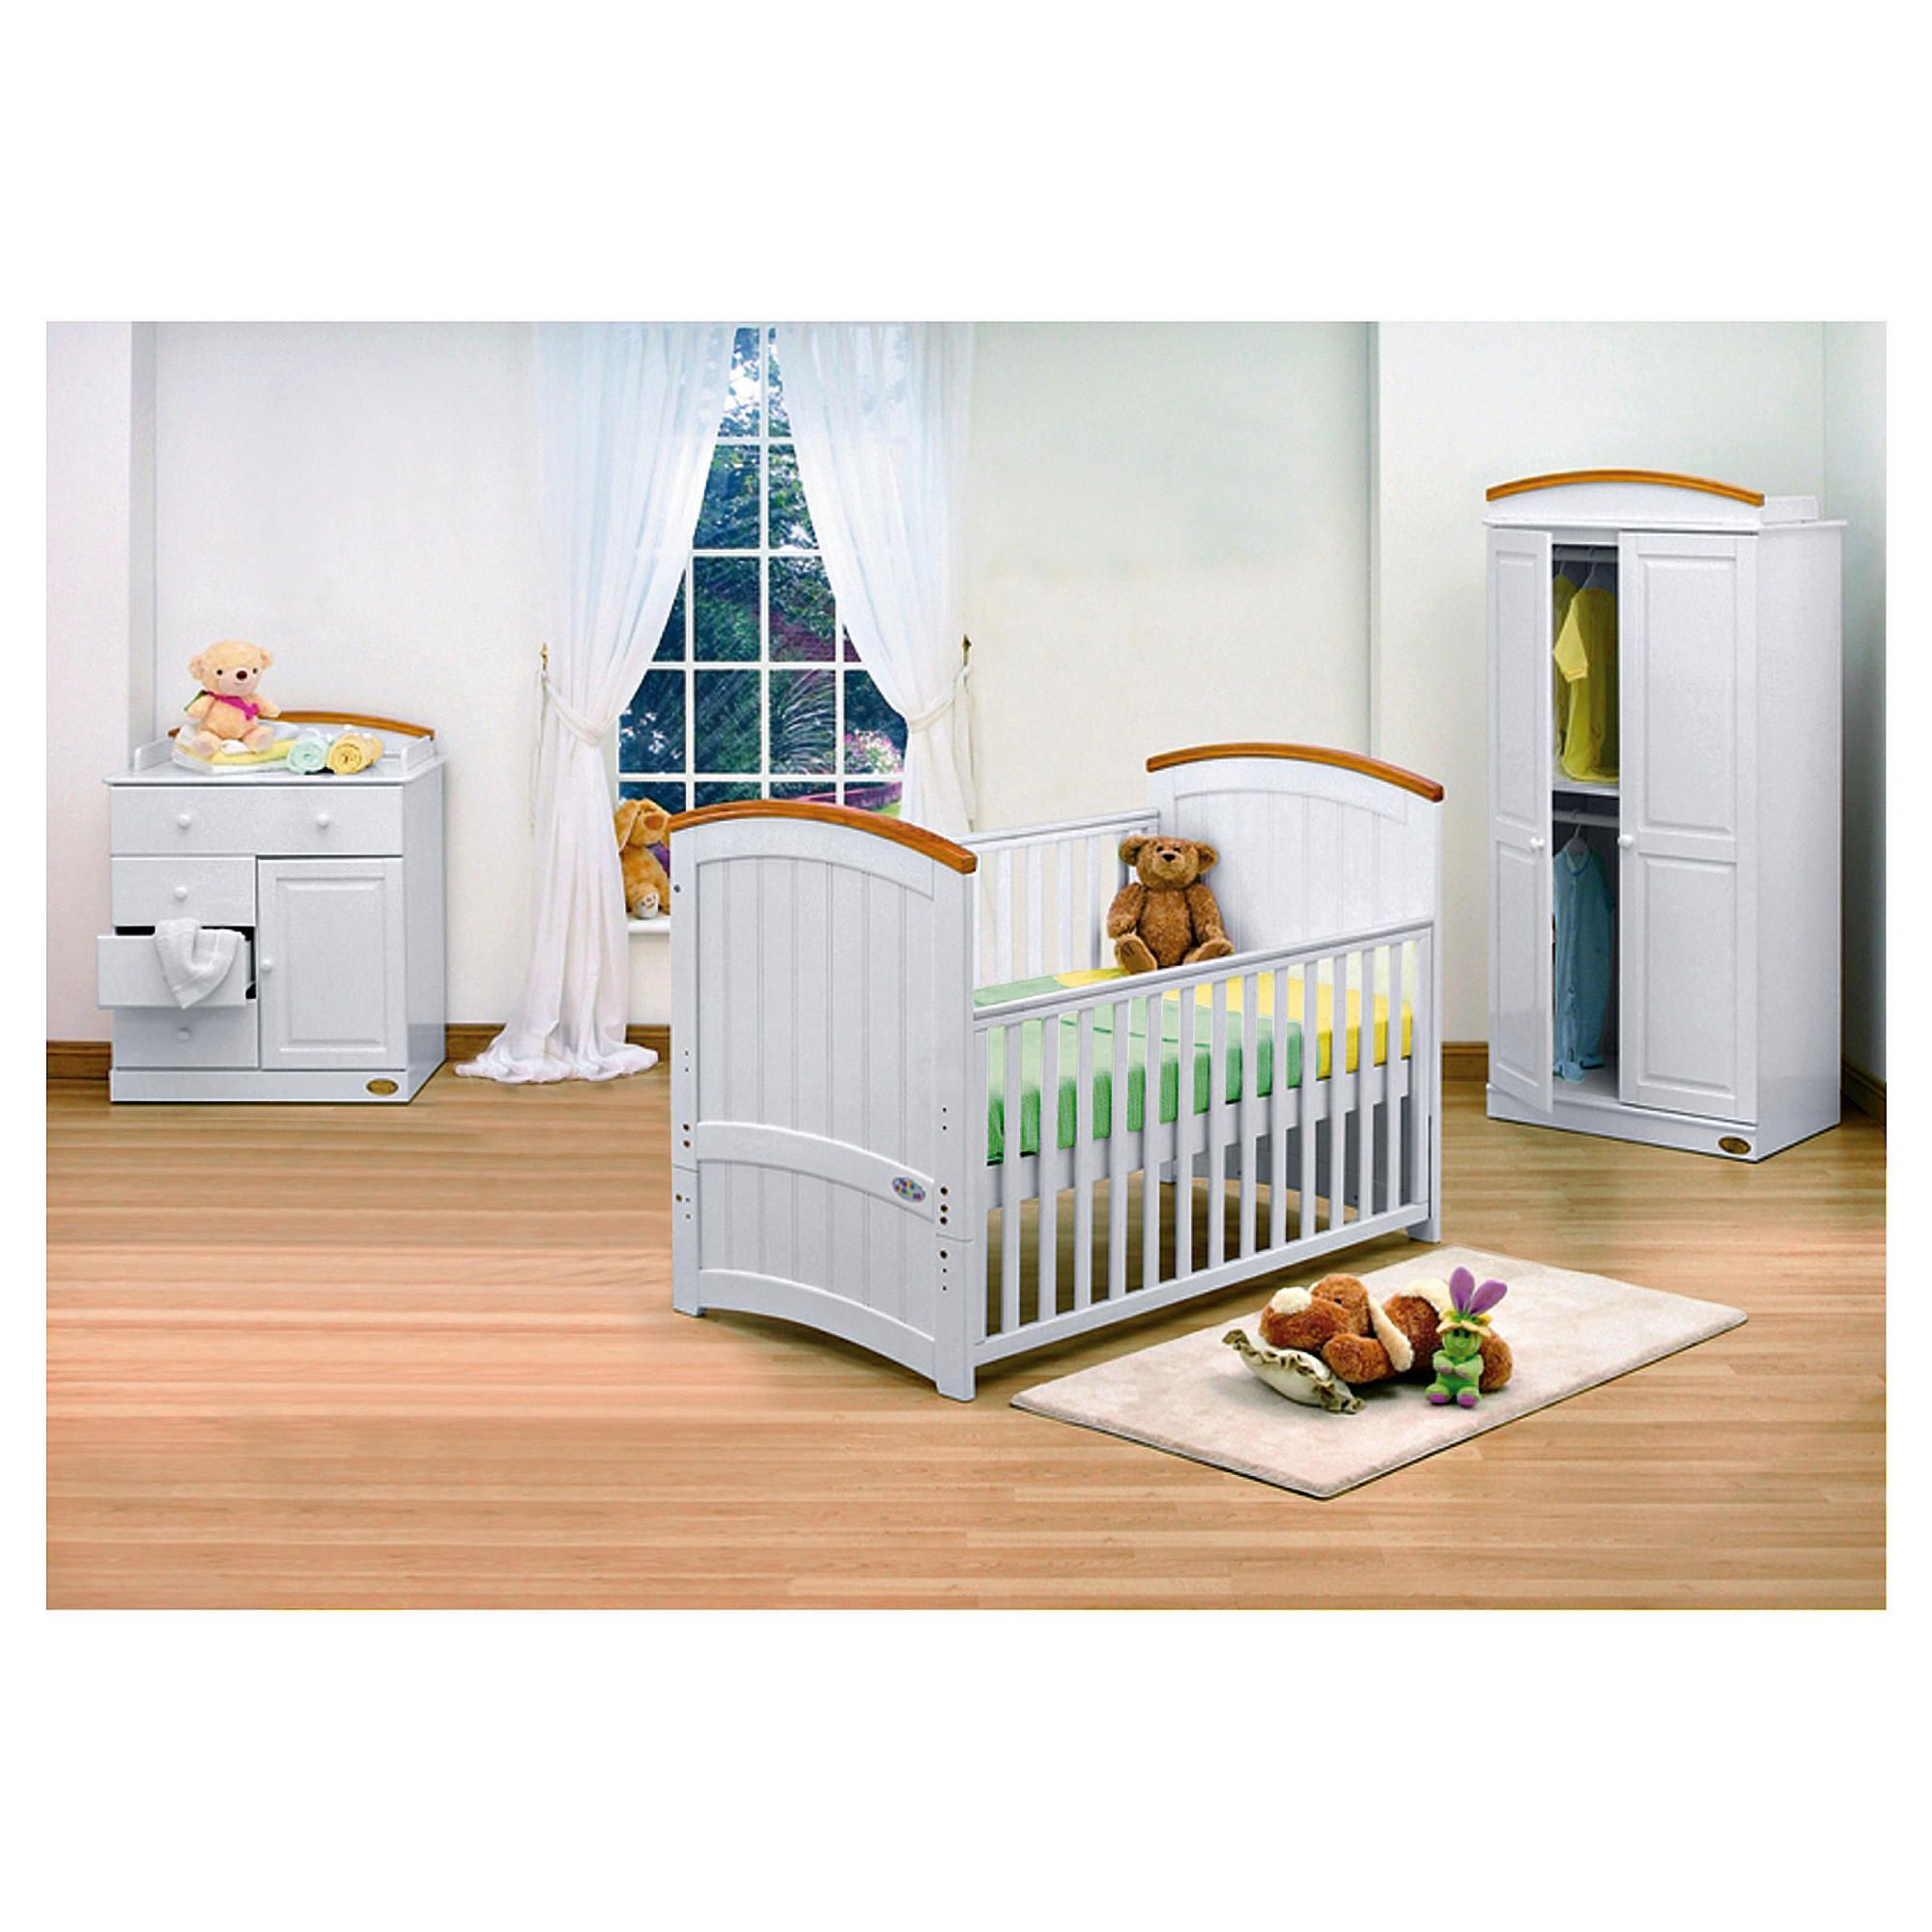 Tutti Bambini Barcelona 4 Piece Room Set, with Free Home Assembly at Tescos Direct